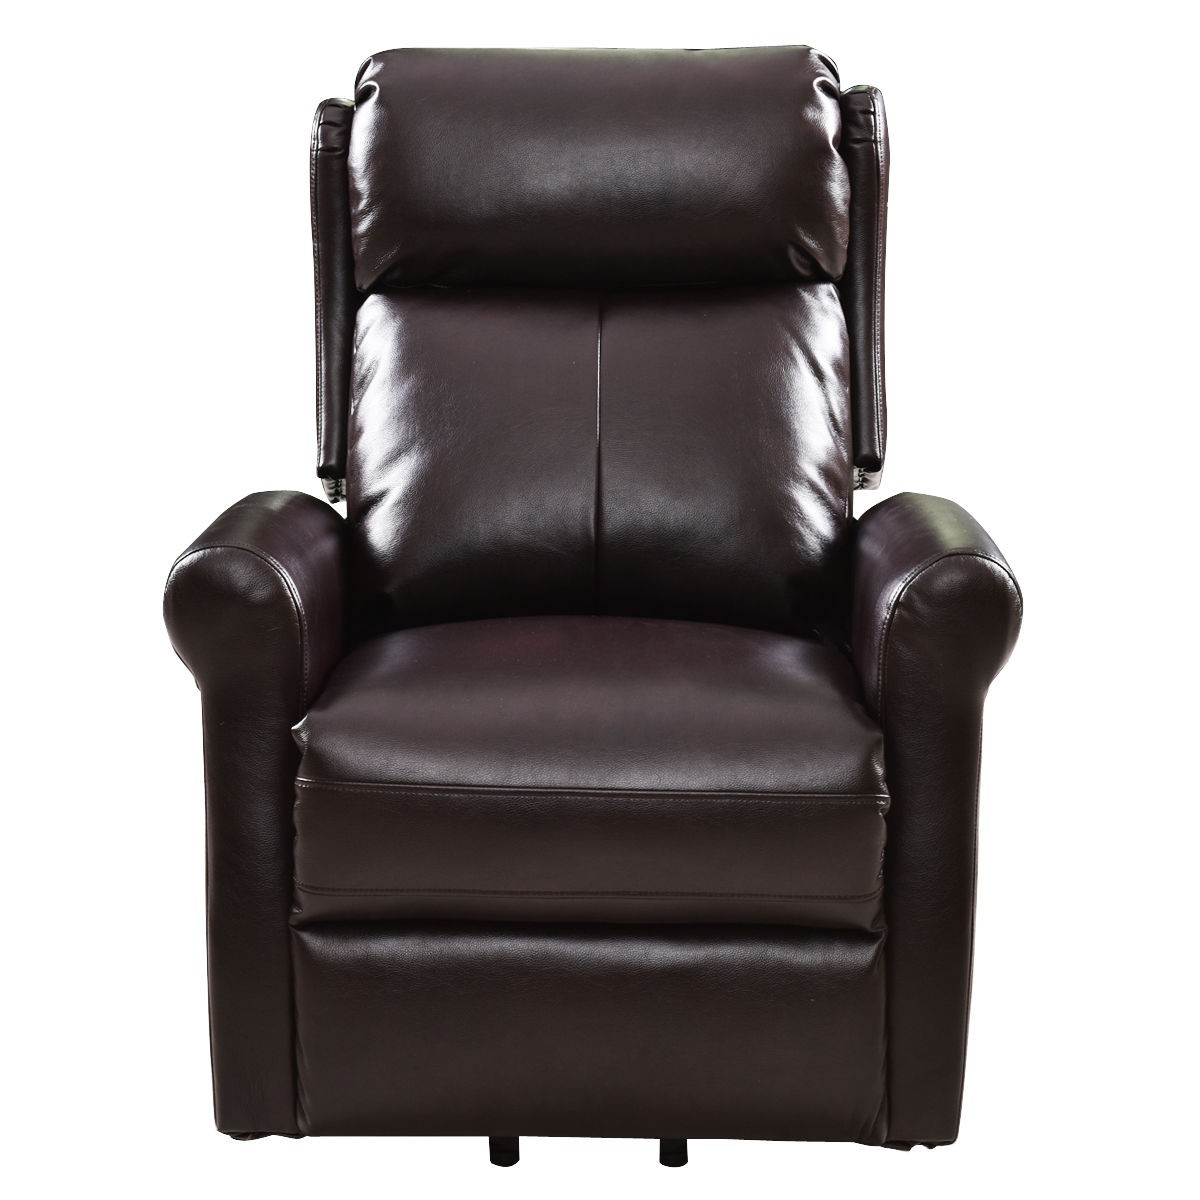 Brown Electric Lift Chair Recliner